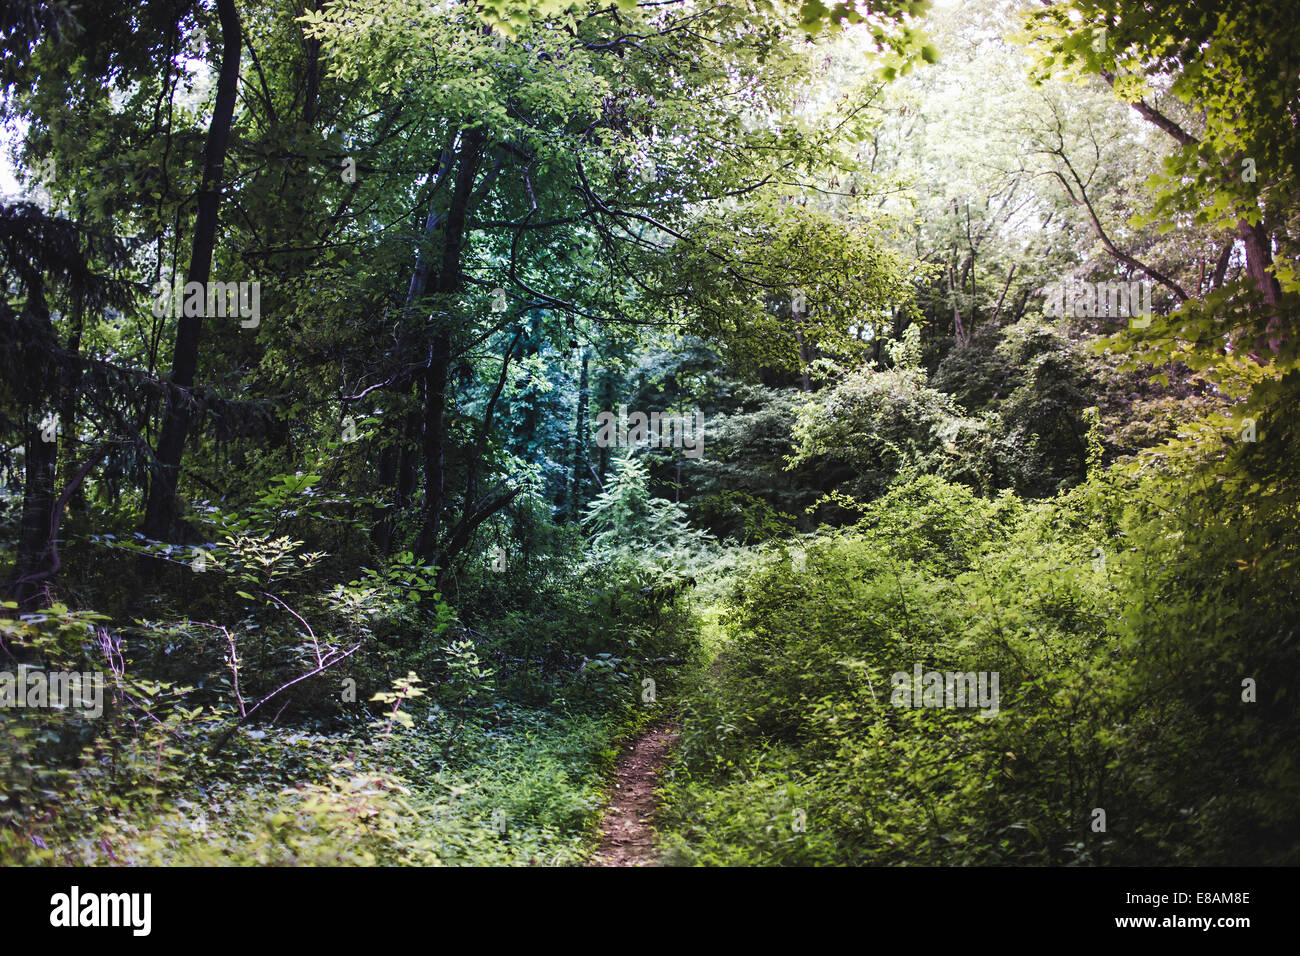 Lush forest scenery, Watchung Reservation, New Jersey, USA Stock Photo